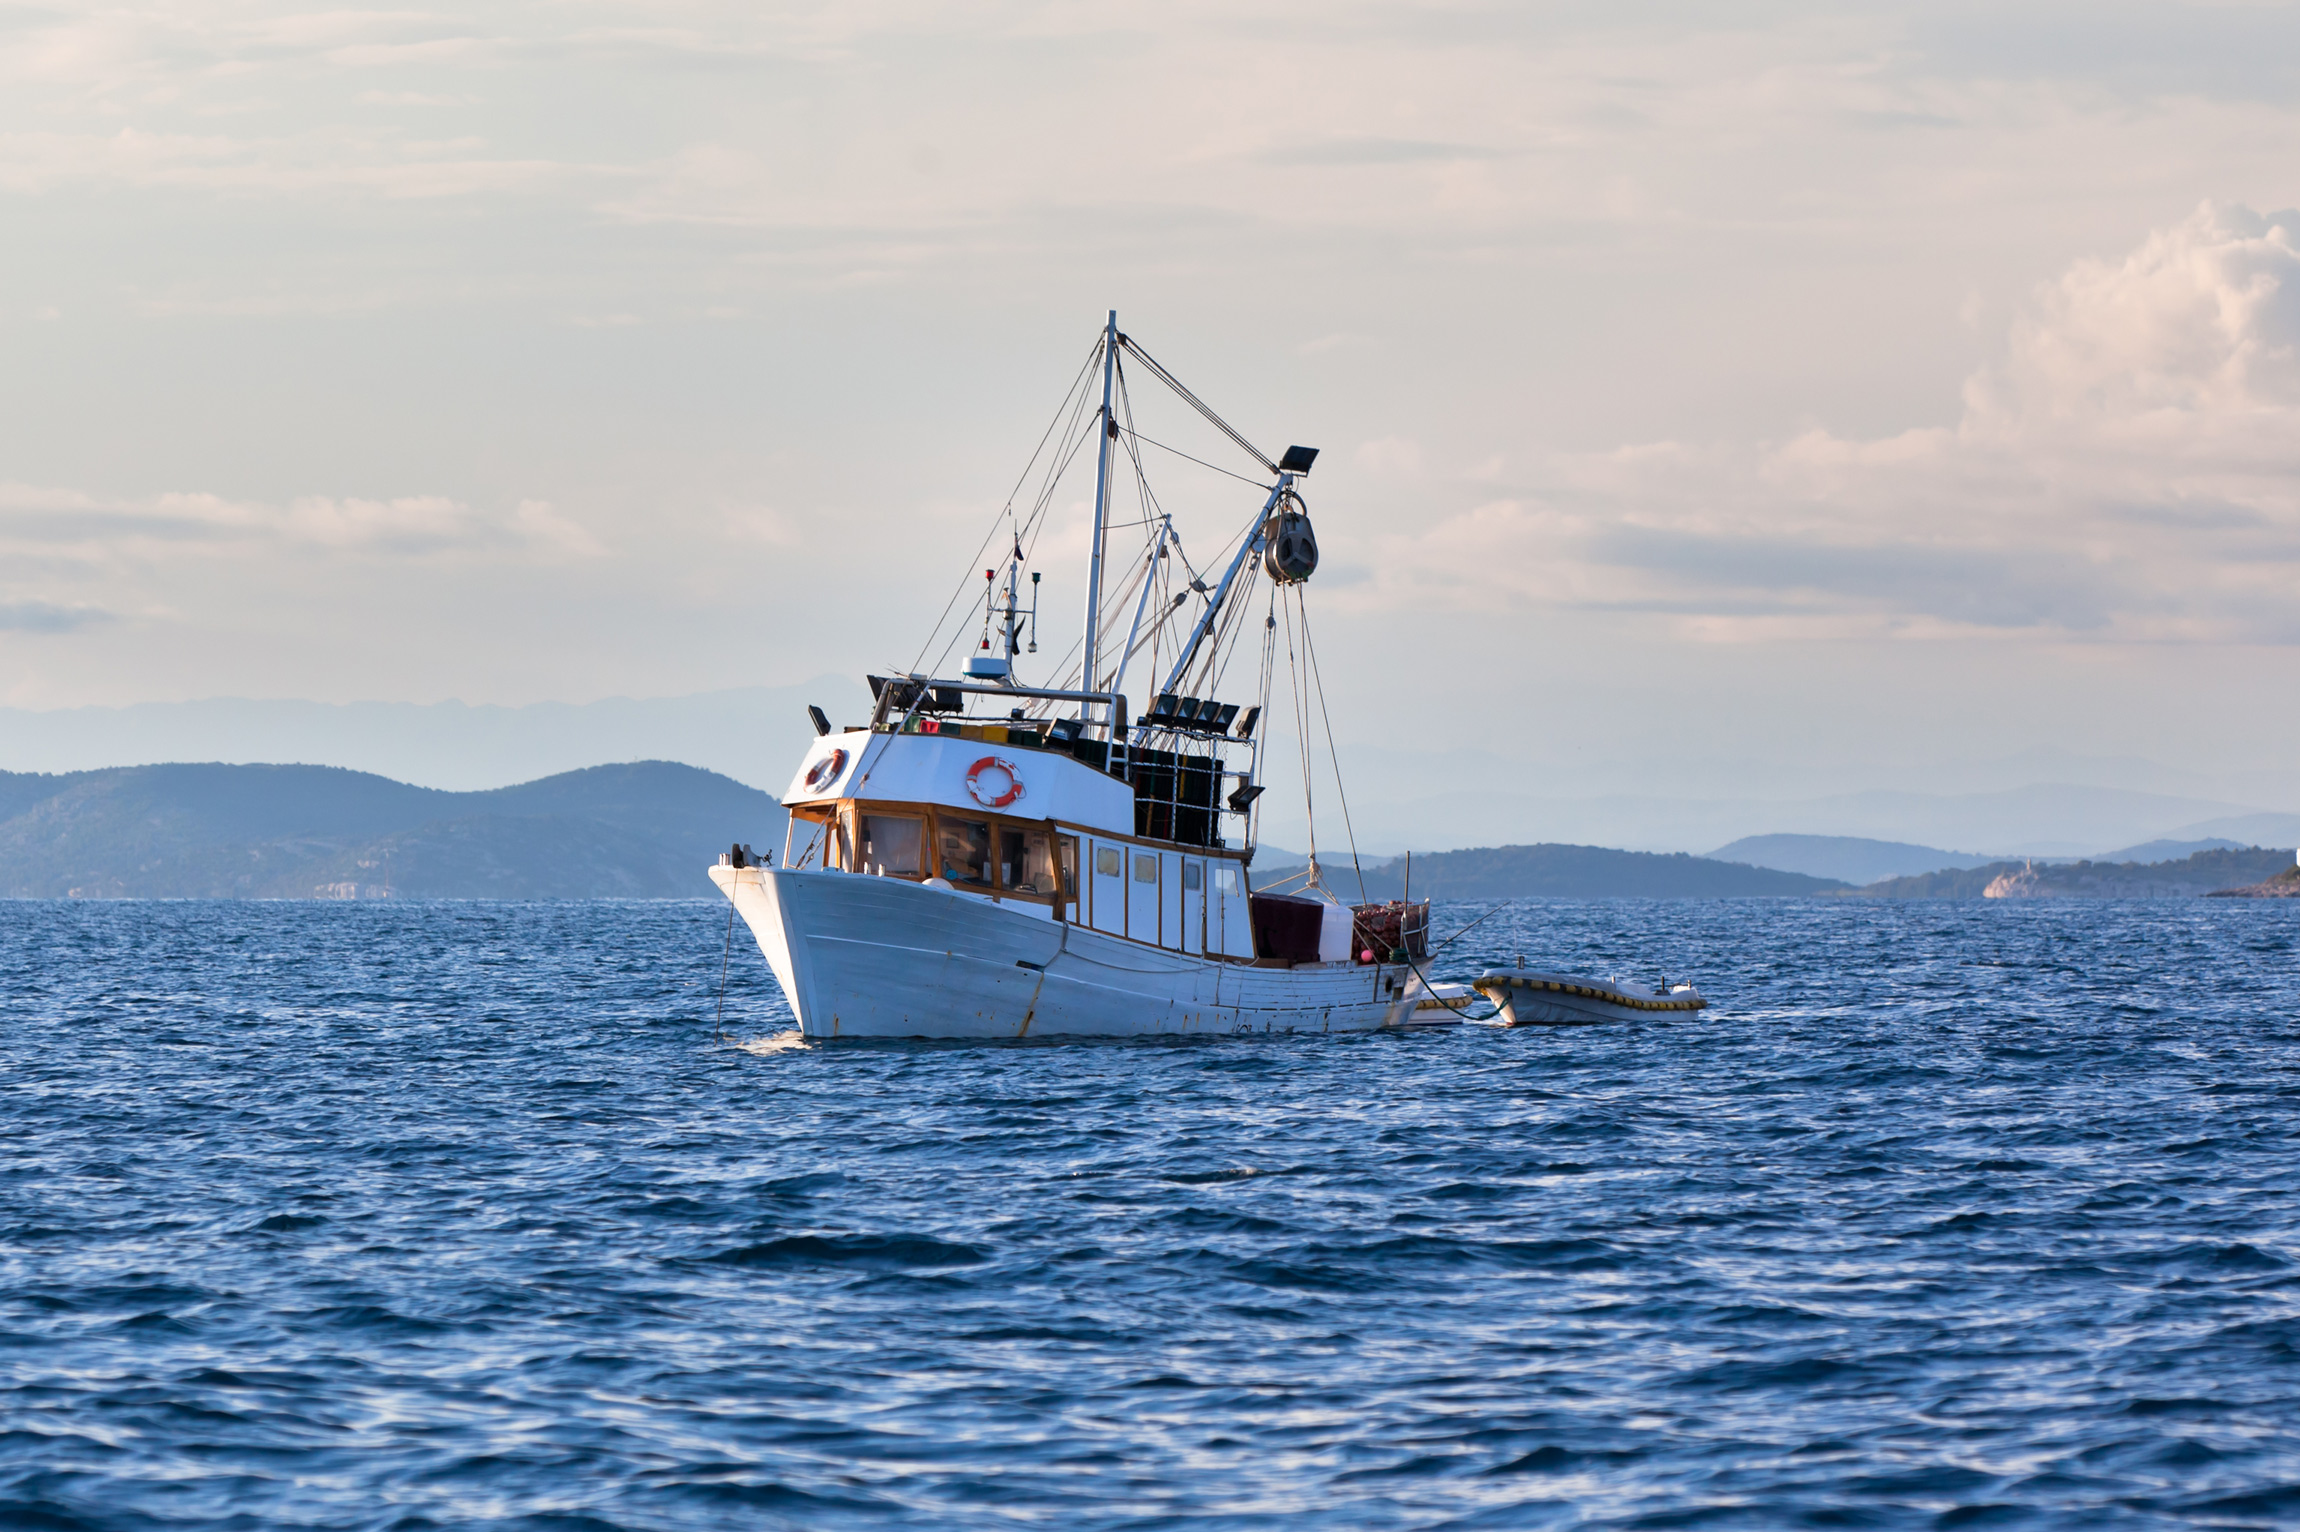 Fishermen’s News: Feds to Allow Additional Foreign Workers in Alaska Commercial Fisheries